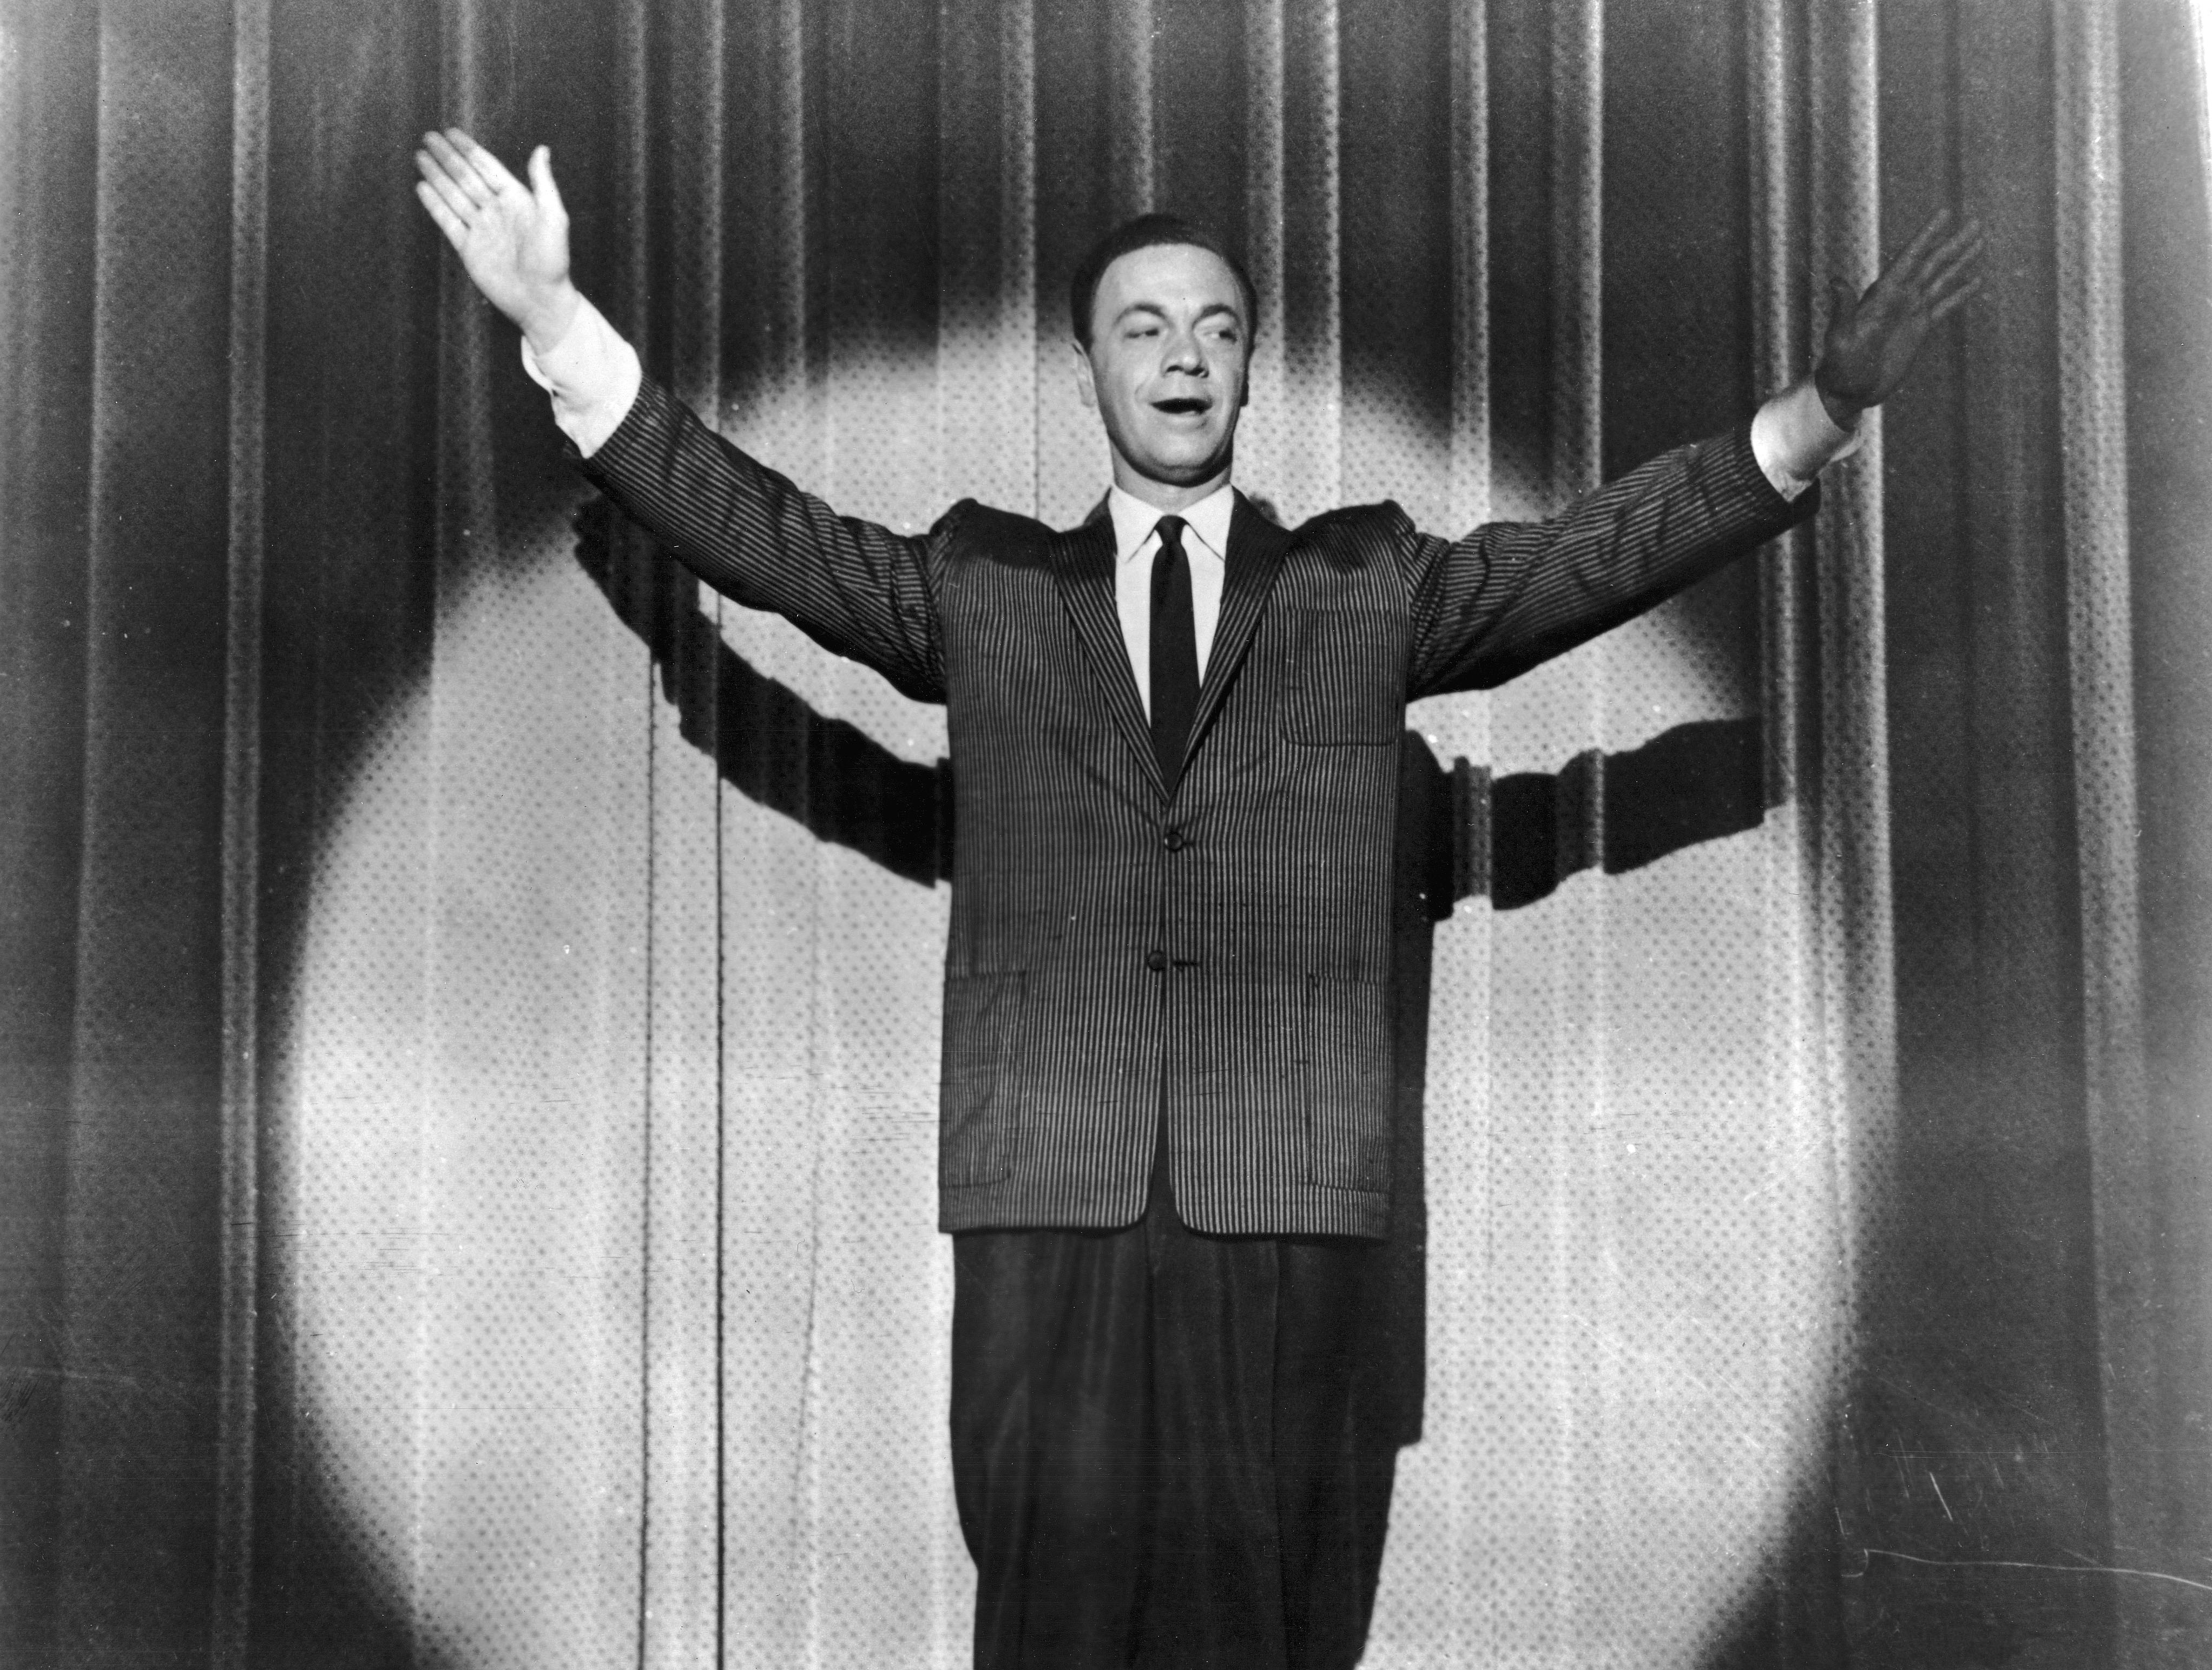 American disc jockey and rock 'n' roll promoter Alan Freed plays himself in the film 'Go, Johnny, Go!', directed by Paul Landres in 1959. Freed's ashes will be removed from the Rock and Roll Hall of Fame and Museum in Cleveland, Ohio on Tuesday, August 5, 2014. (Archive Photos&amp;mdash;Getty Images)